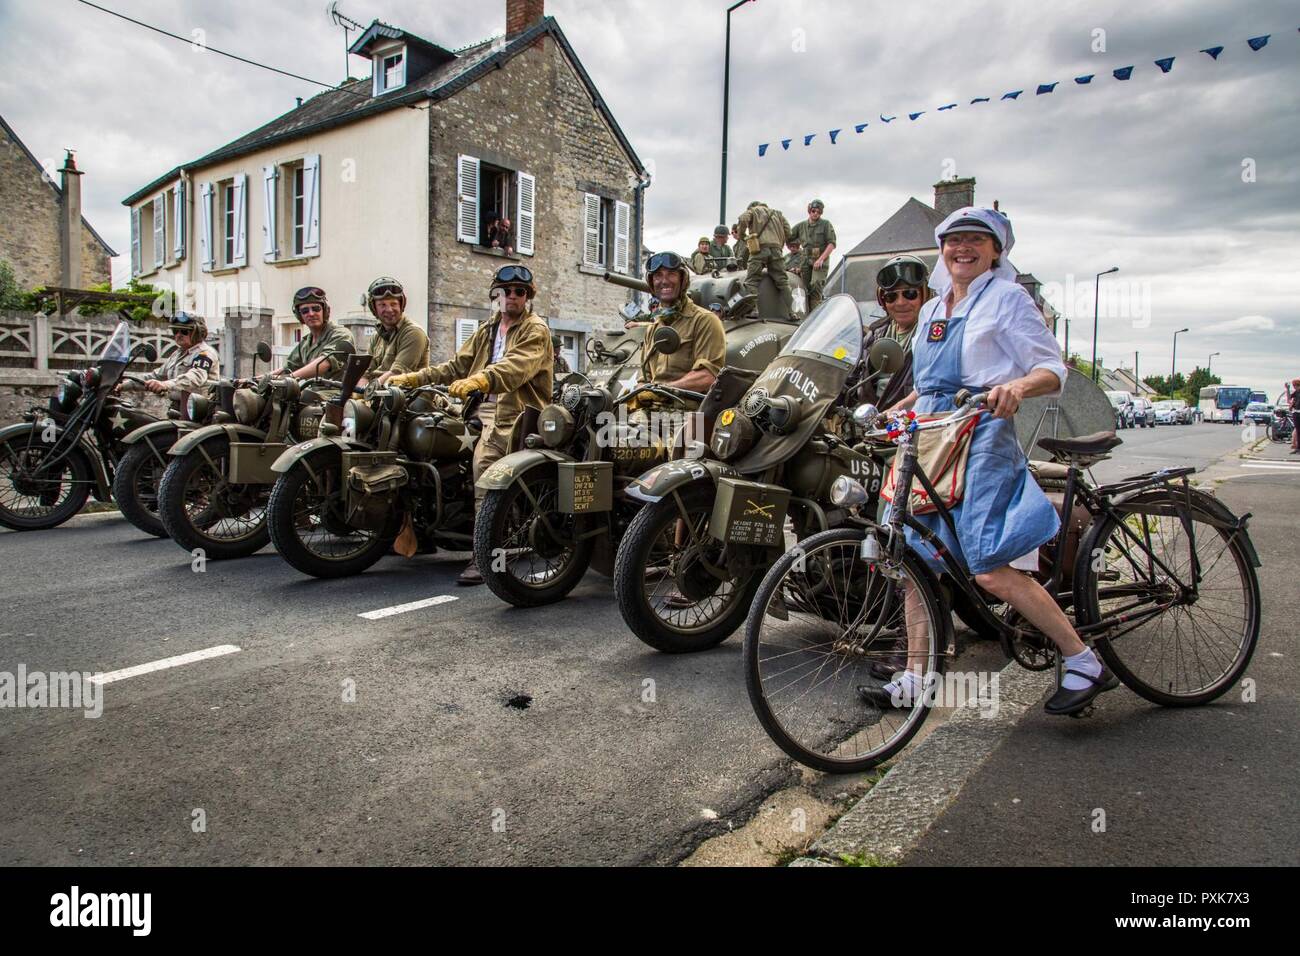 WWII re-enactors gather together for D-Day 73 celebrations in St. Mere-Eglise, France. Stock Photo